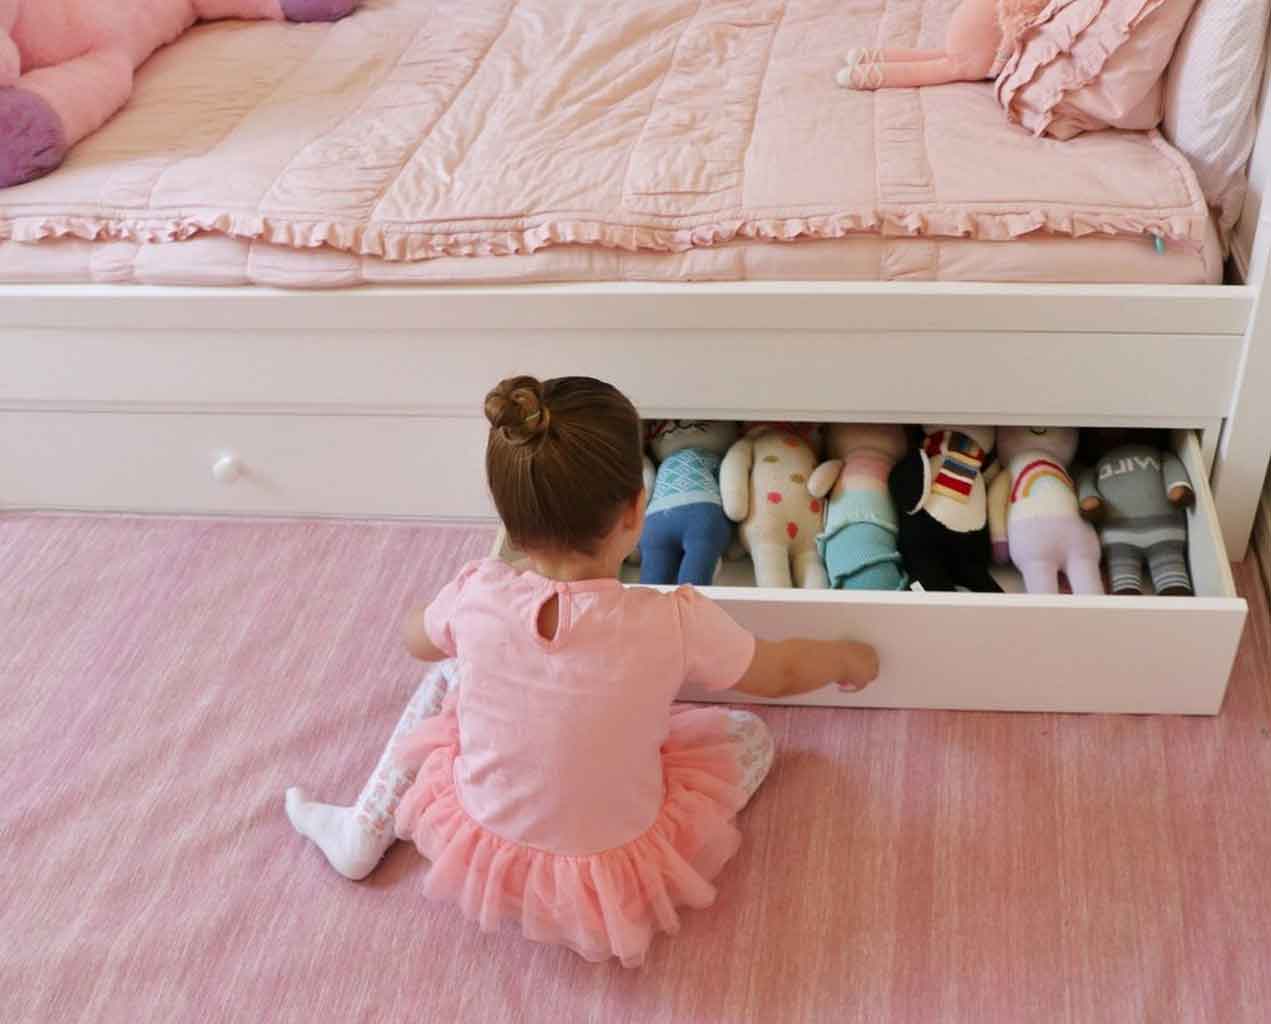 5 Beauty And Functional Girls Twin Bed With Storage Design Inspirations | Roy Home Design